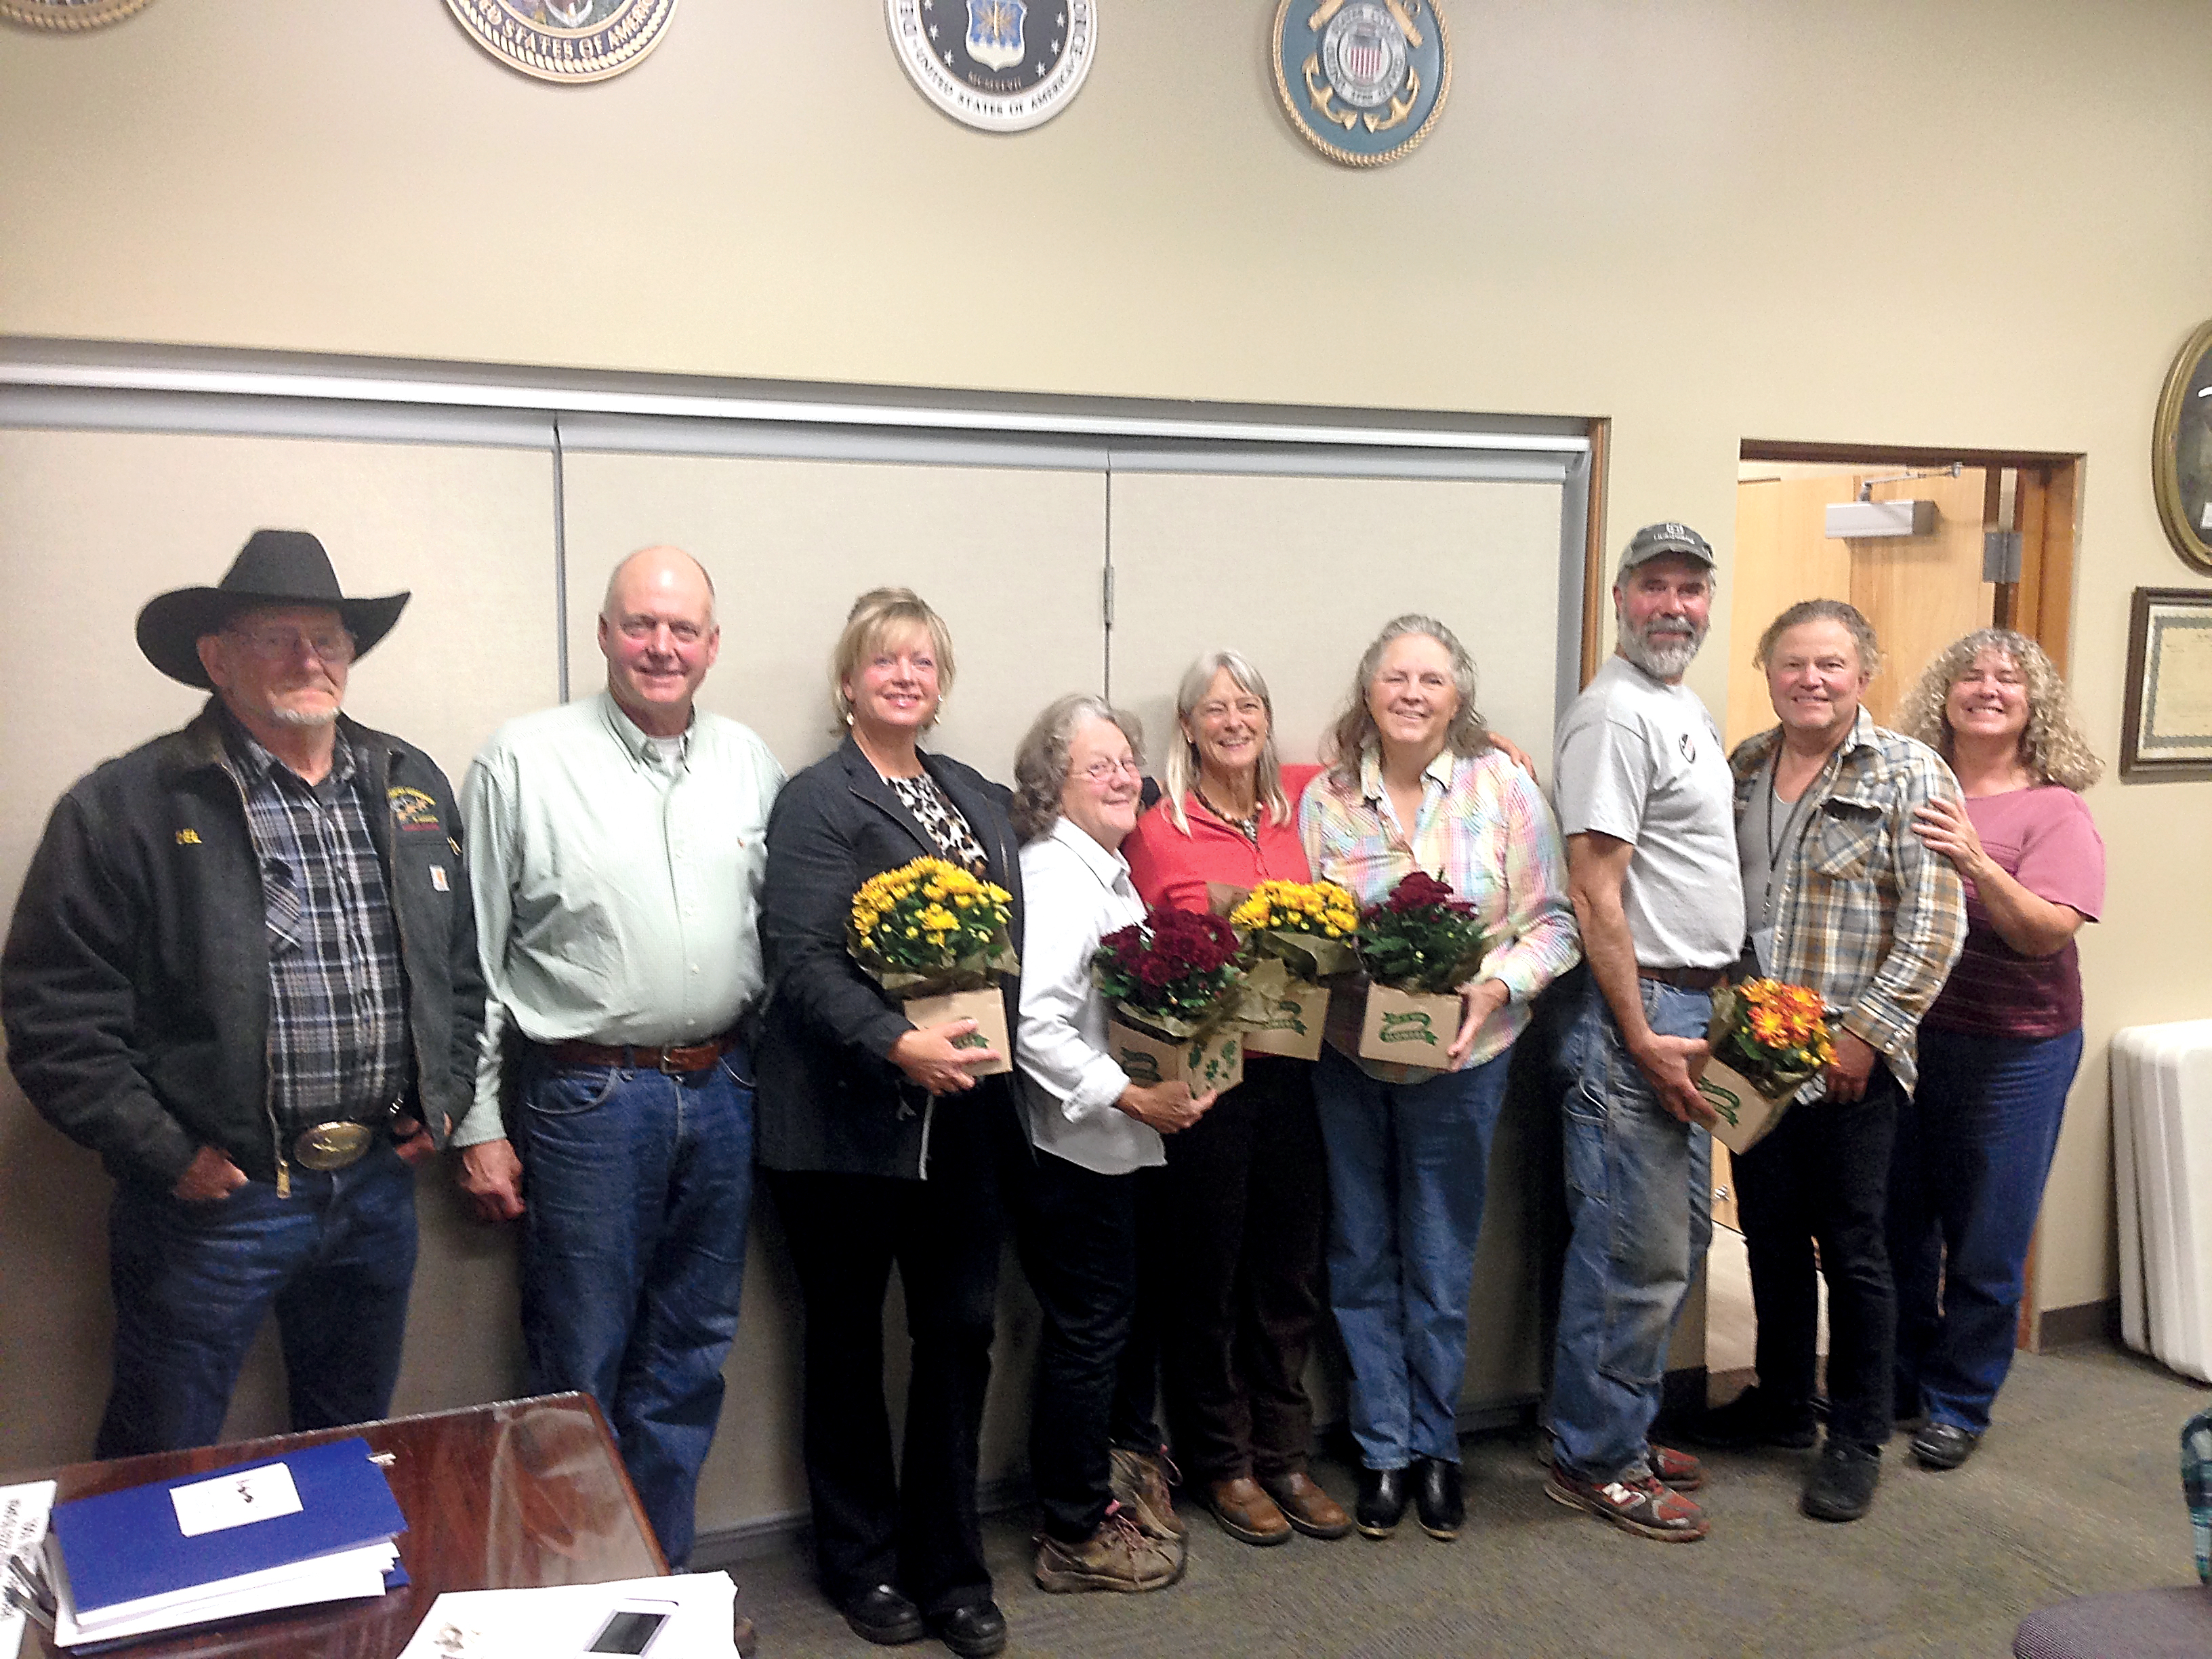 Backcountry Horseman’s Peninsula Chapter members who received recognition during October’s monthly meeting for their hours of voluntary service this year in trail building